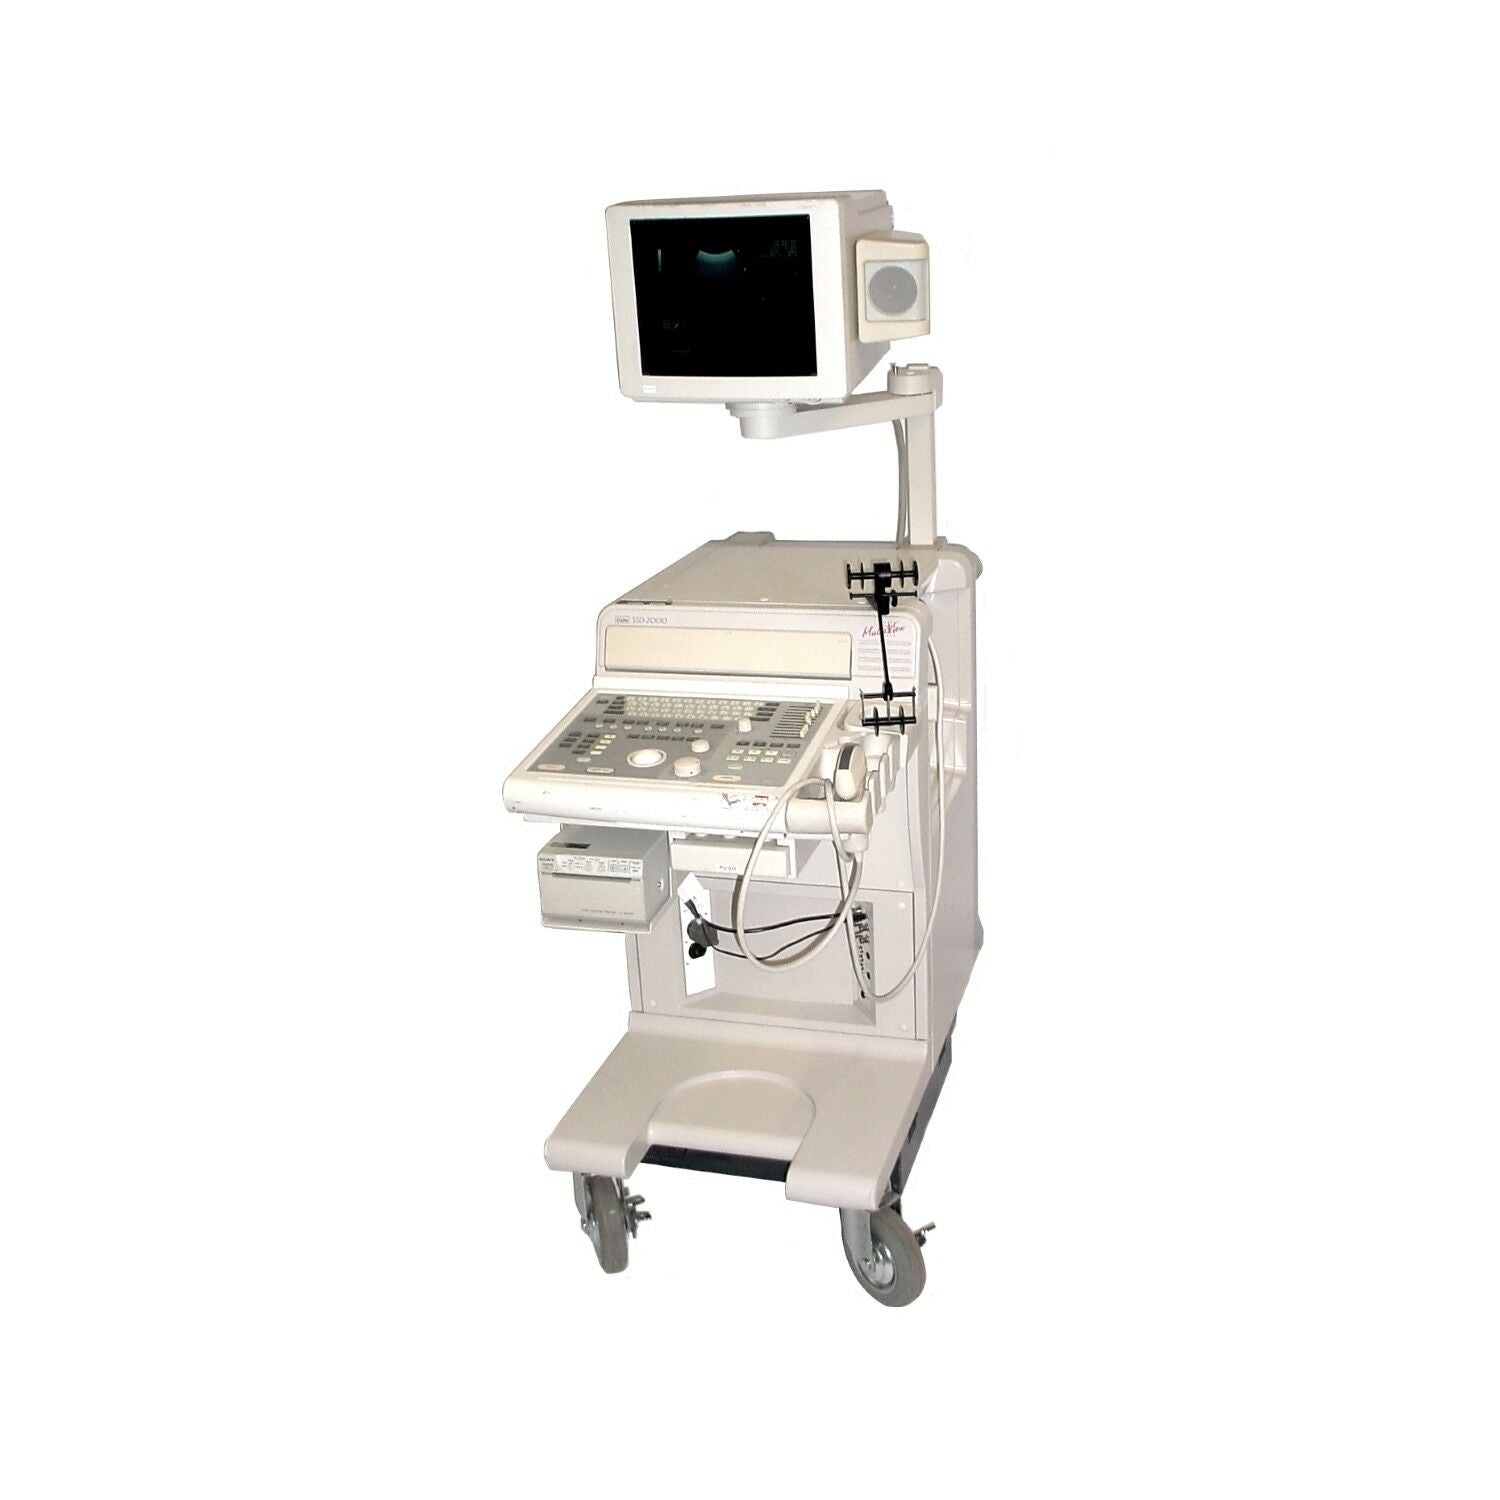 Aloka SSD-2000 2000DC Multiview Ultrasound w/ UST-979 & 995 Transducer Probes DIAGNOSTIC ULTRASOUND MACHINES FOR SALE